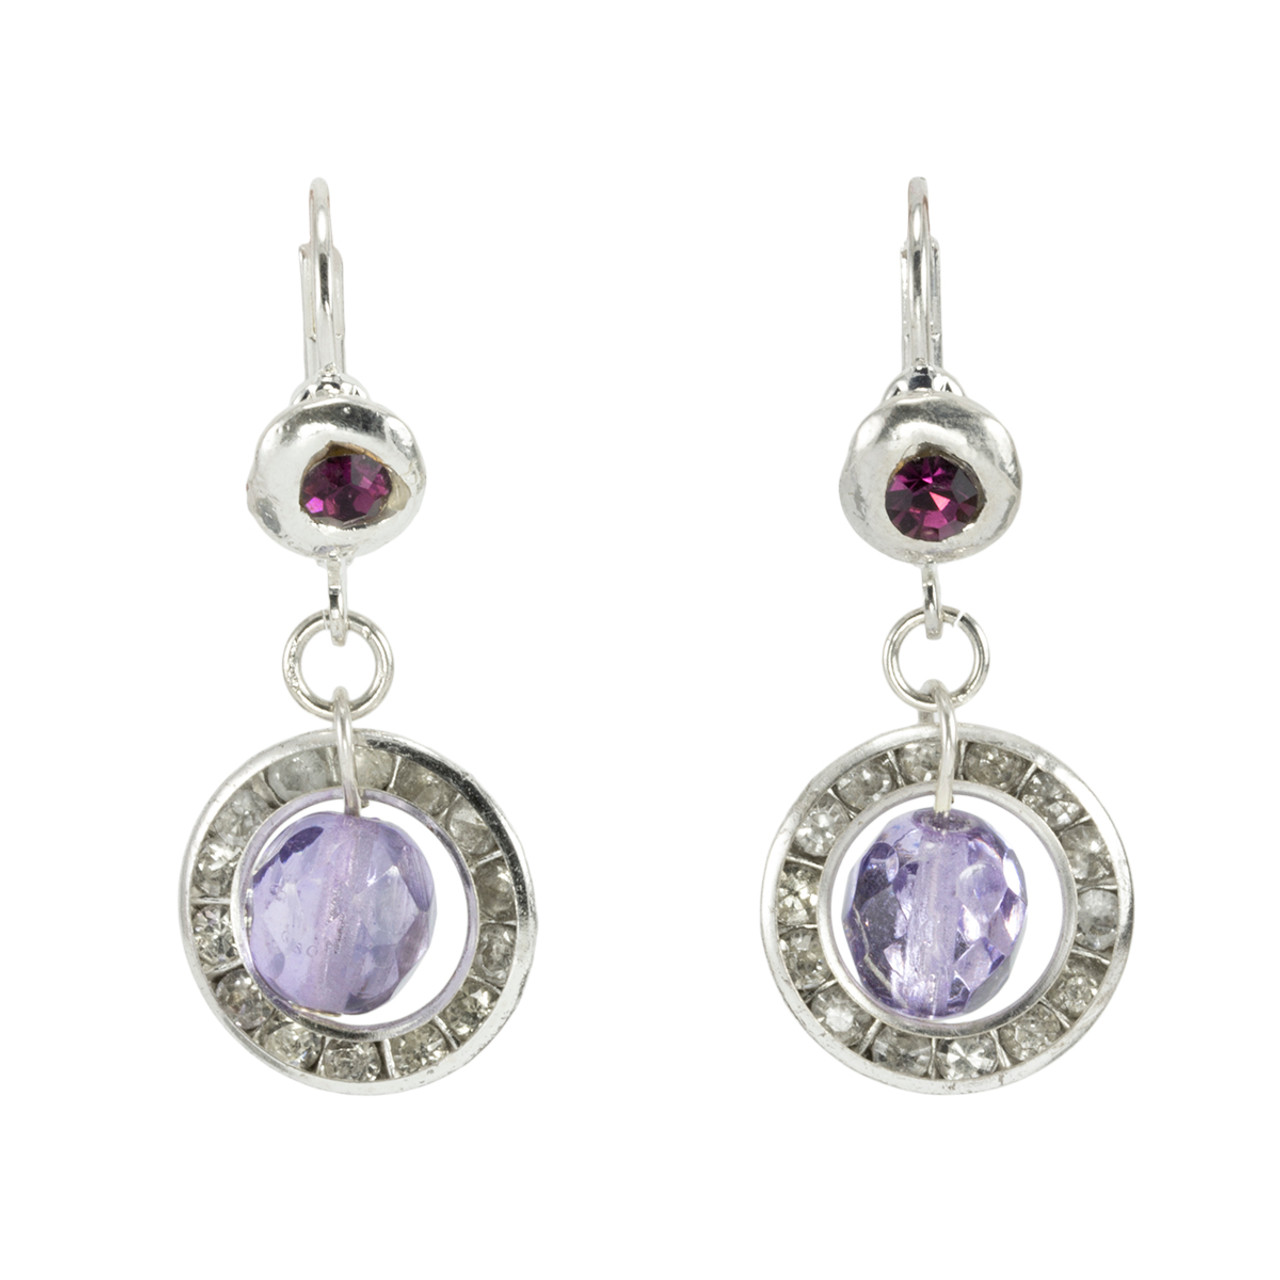 Anat Collection Elegant Purple Sterling Perfection Earrings